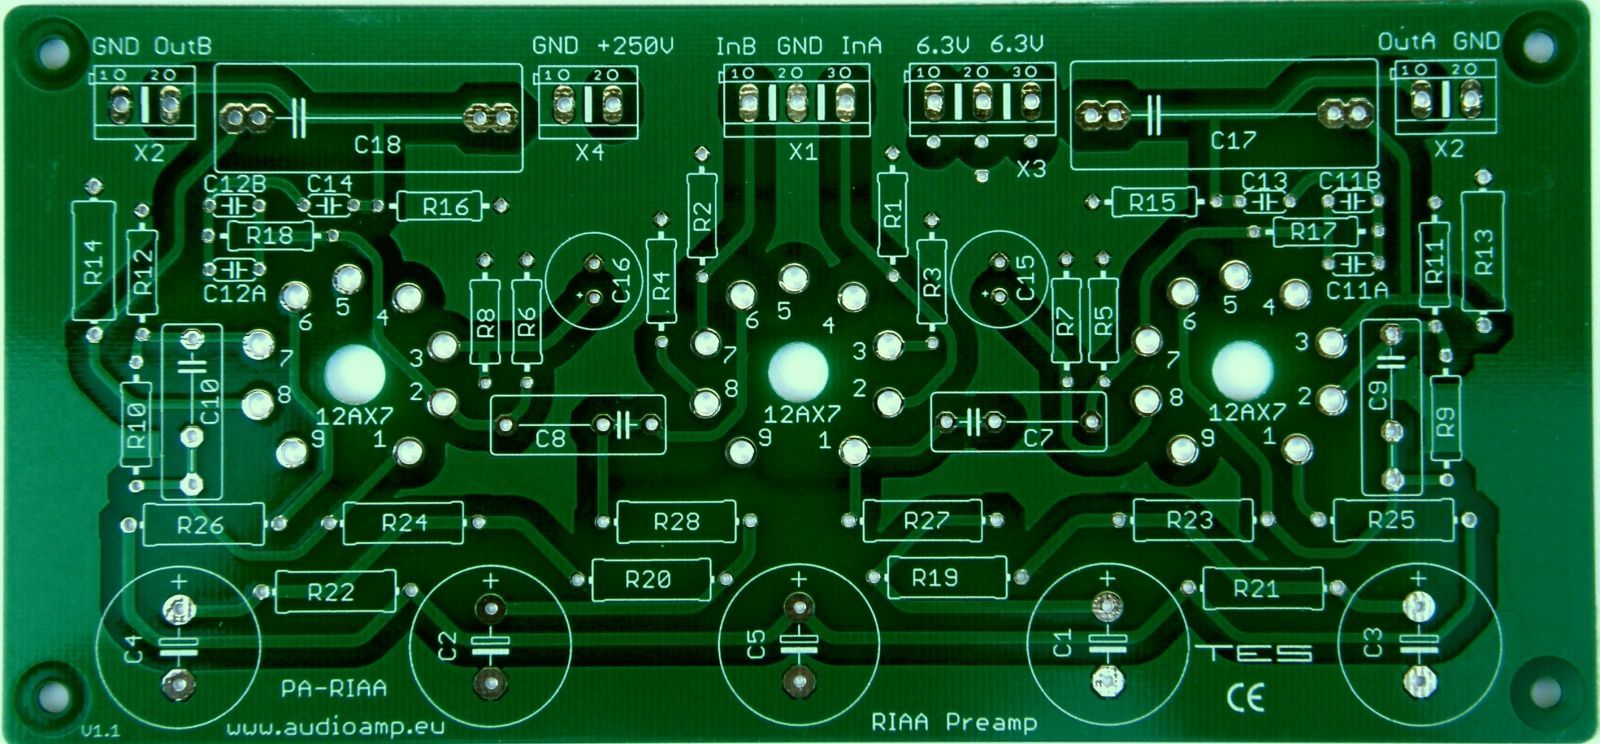 PCB - RIAA Preamplifier, tubes on the parts side TES